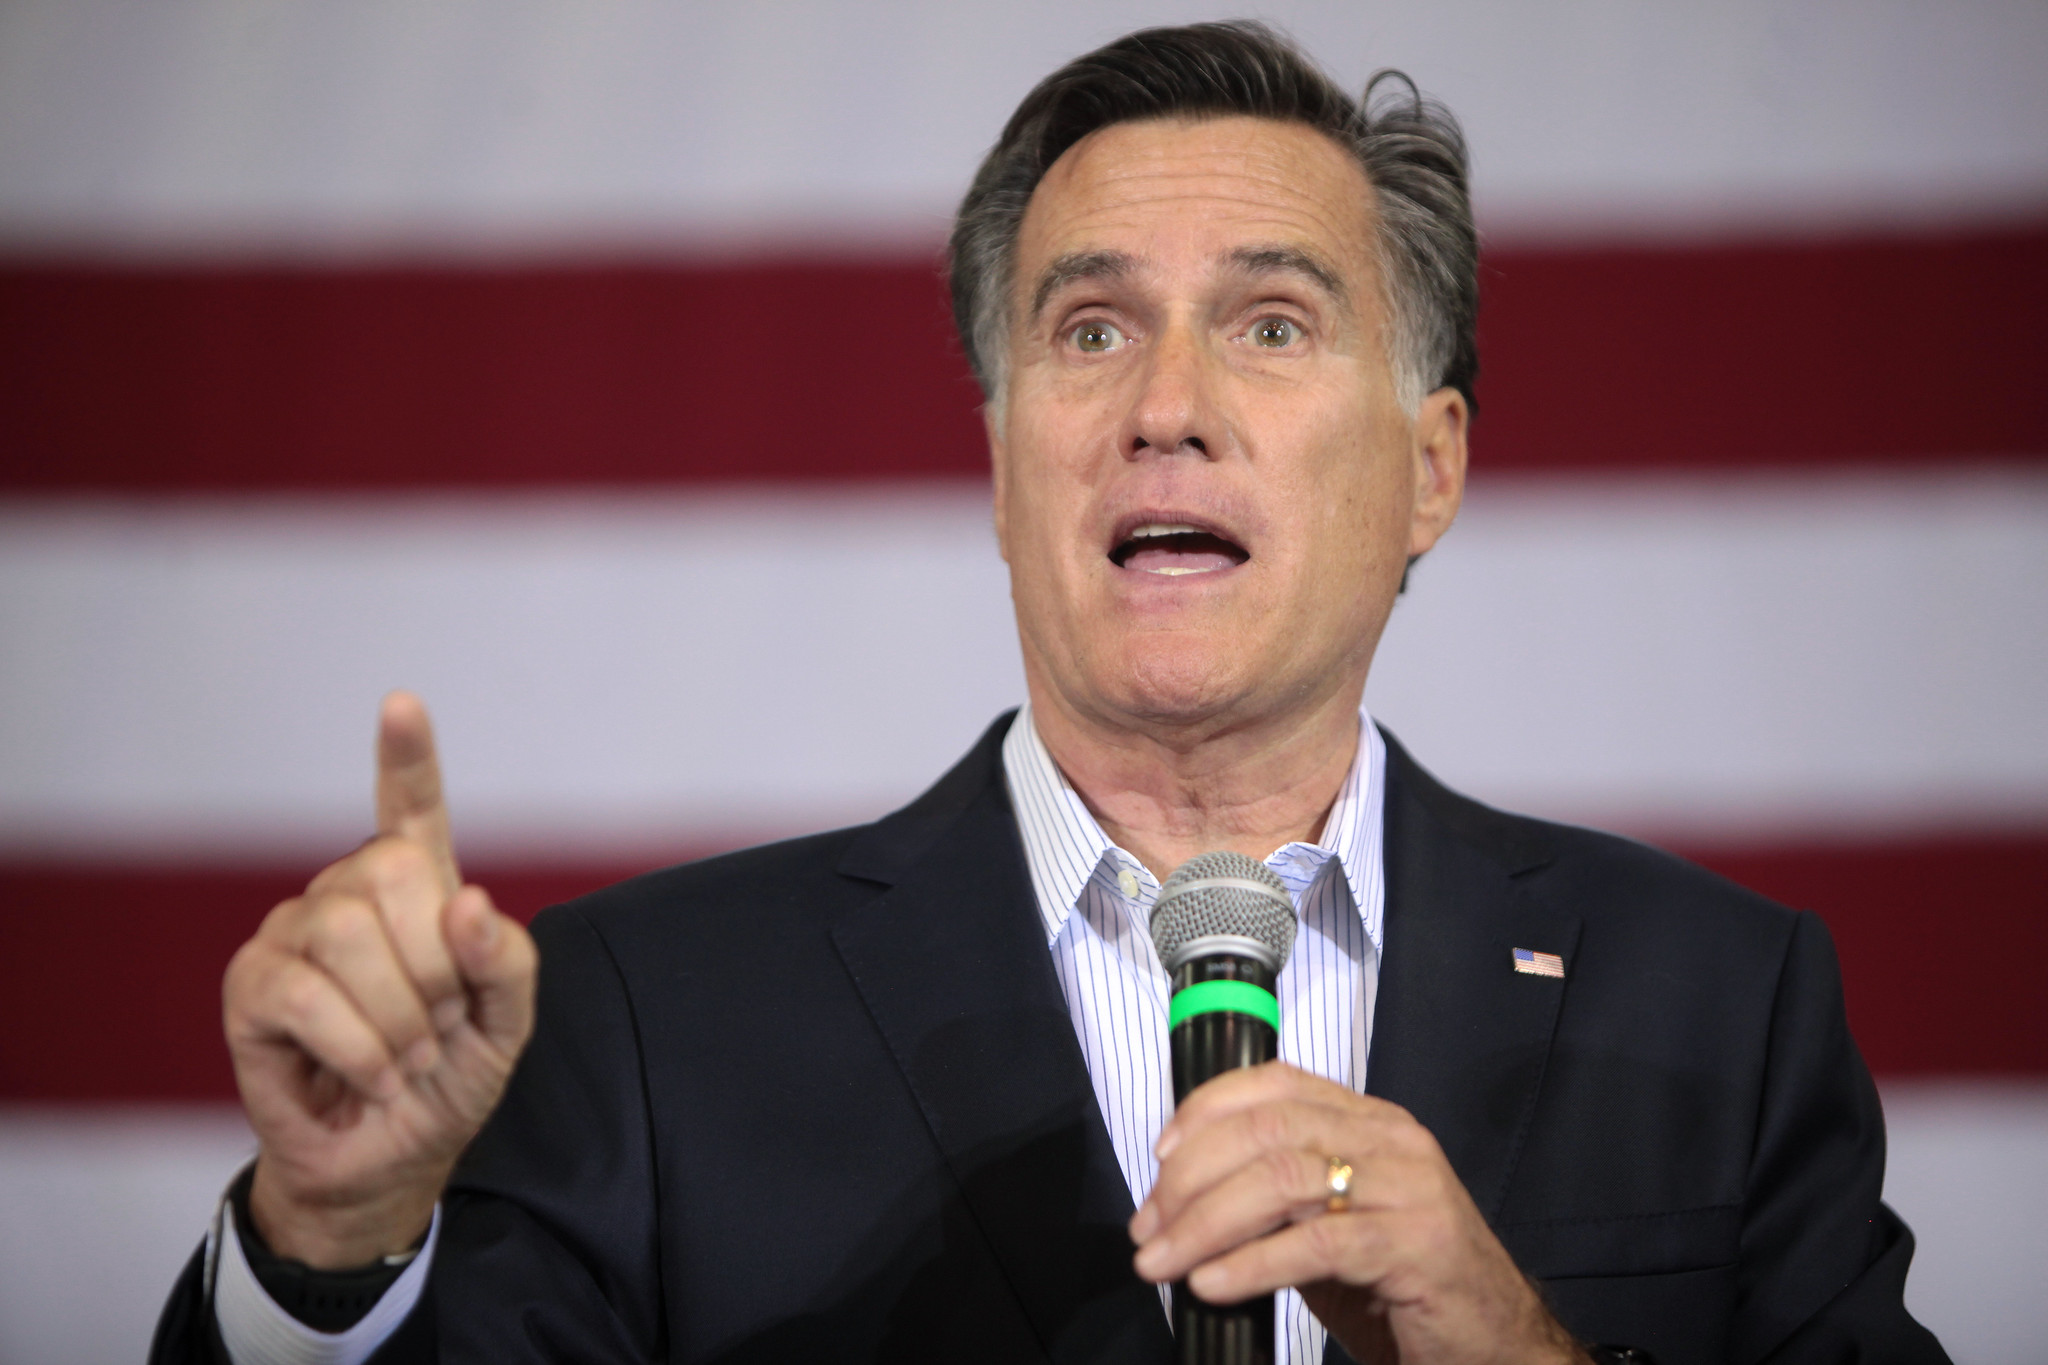 Mitt Romney delivers totally weak-ass response to racist Trump tweets / Boing Boing2048 x 1365